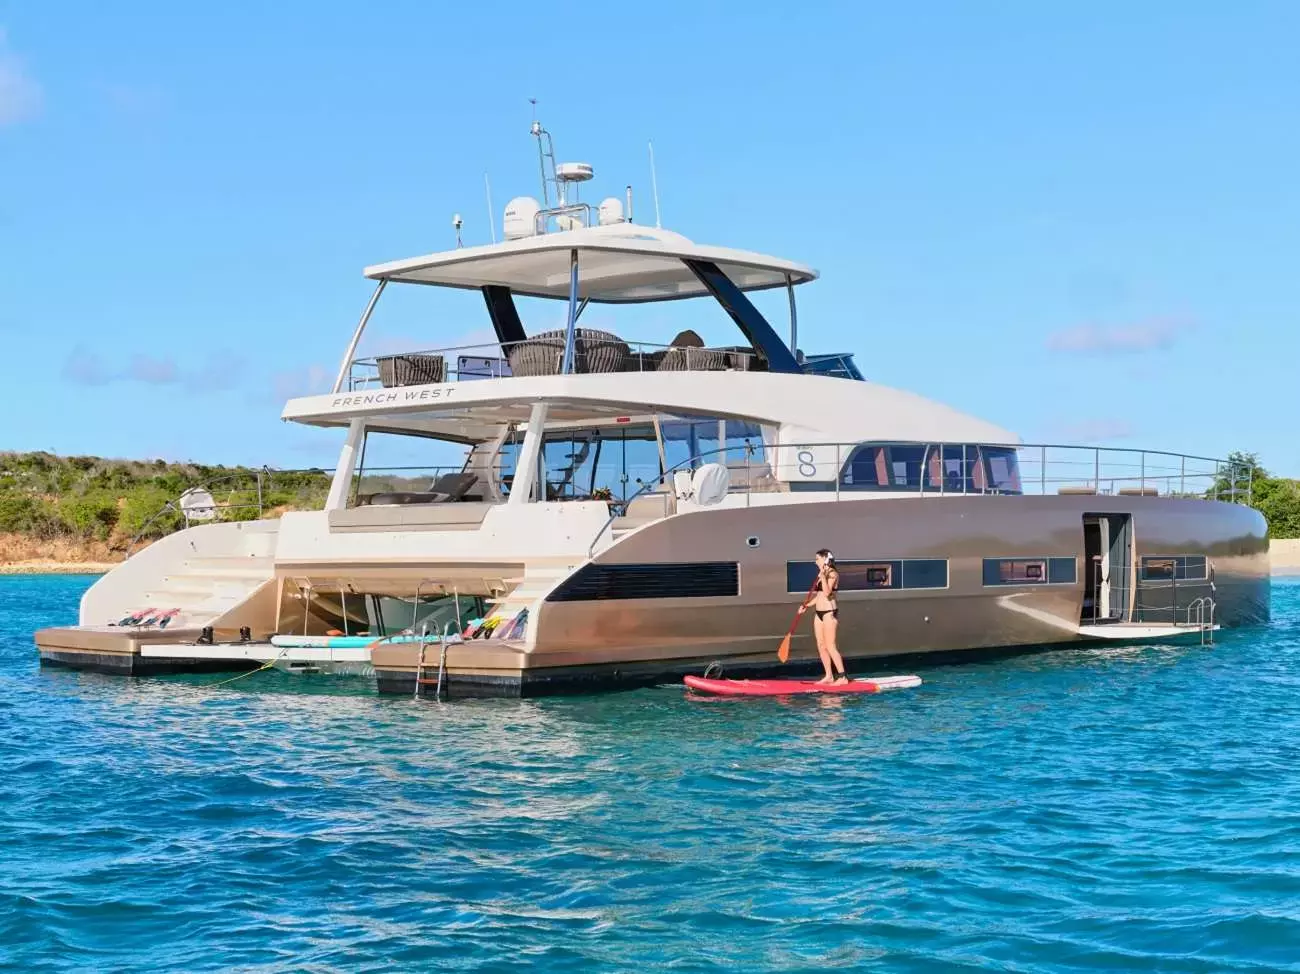 Frenchwest by Lagoon - Special Offer for a private Power Catamaran Rental in Gustavia with a crew